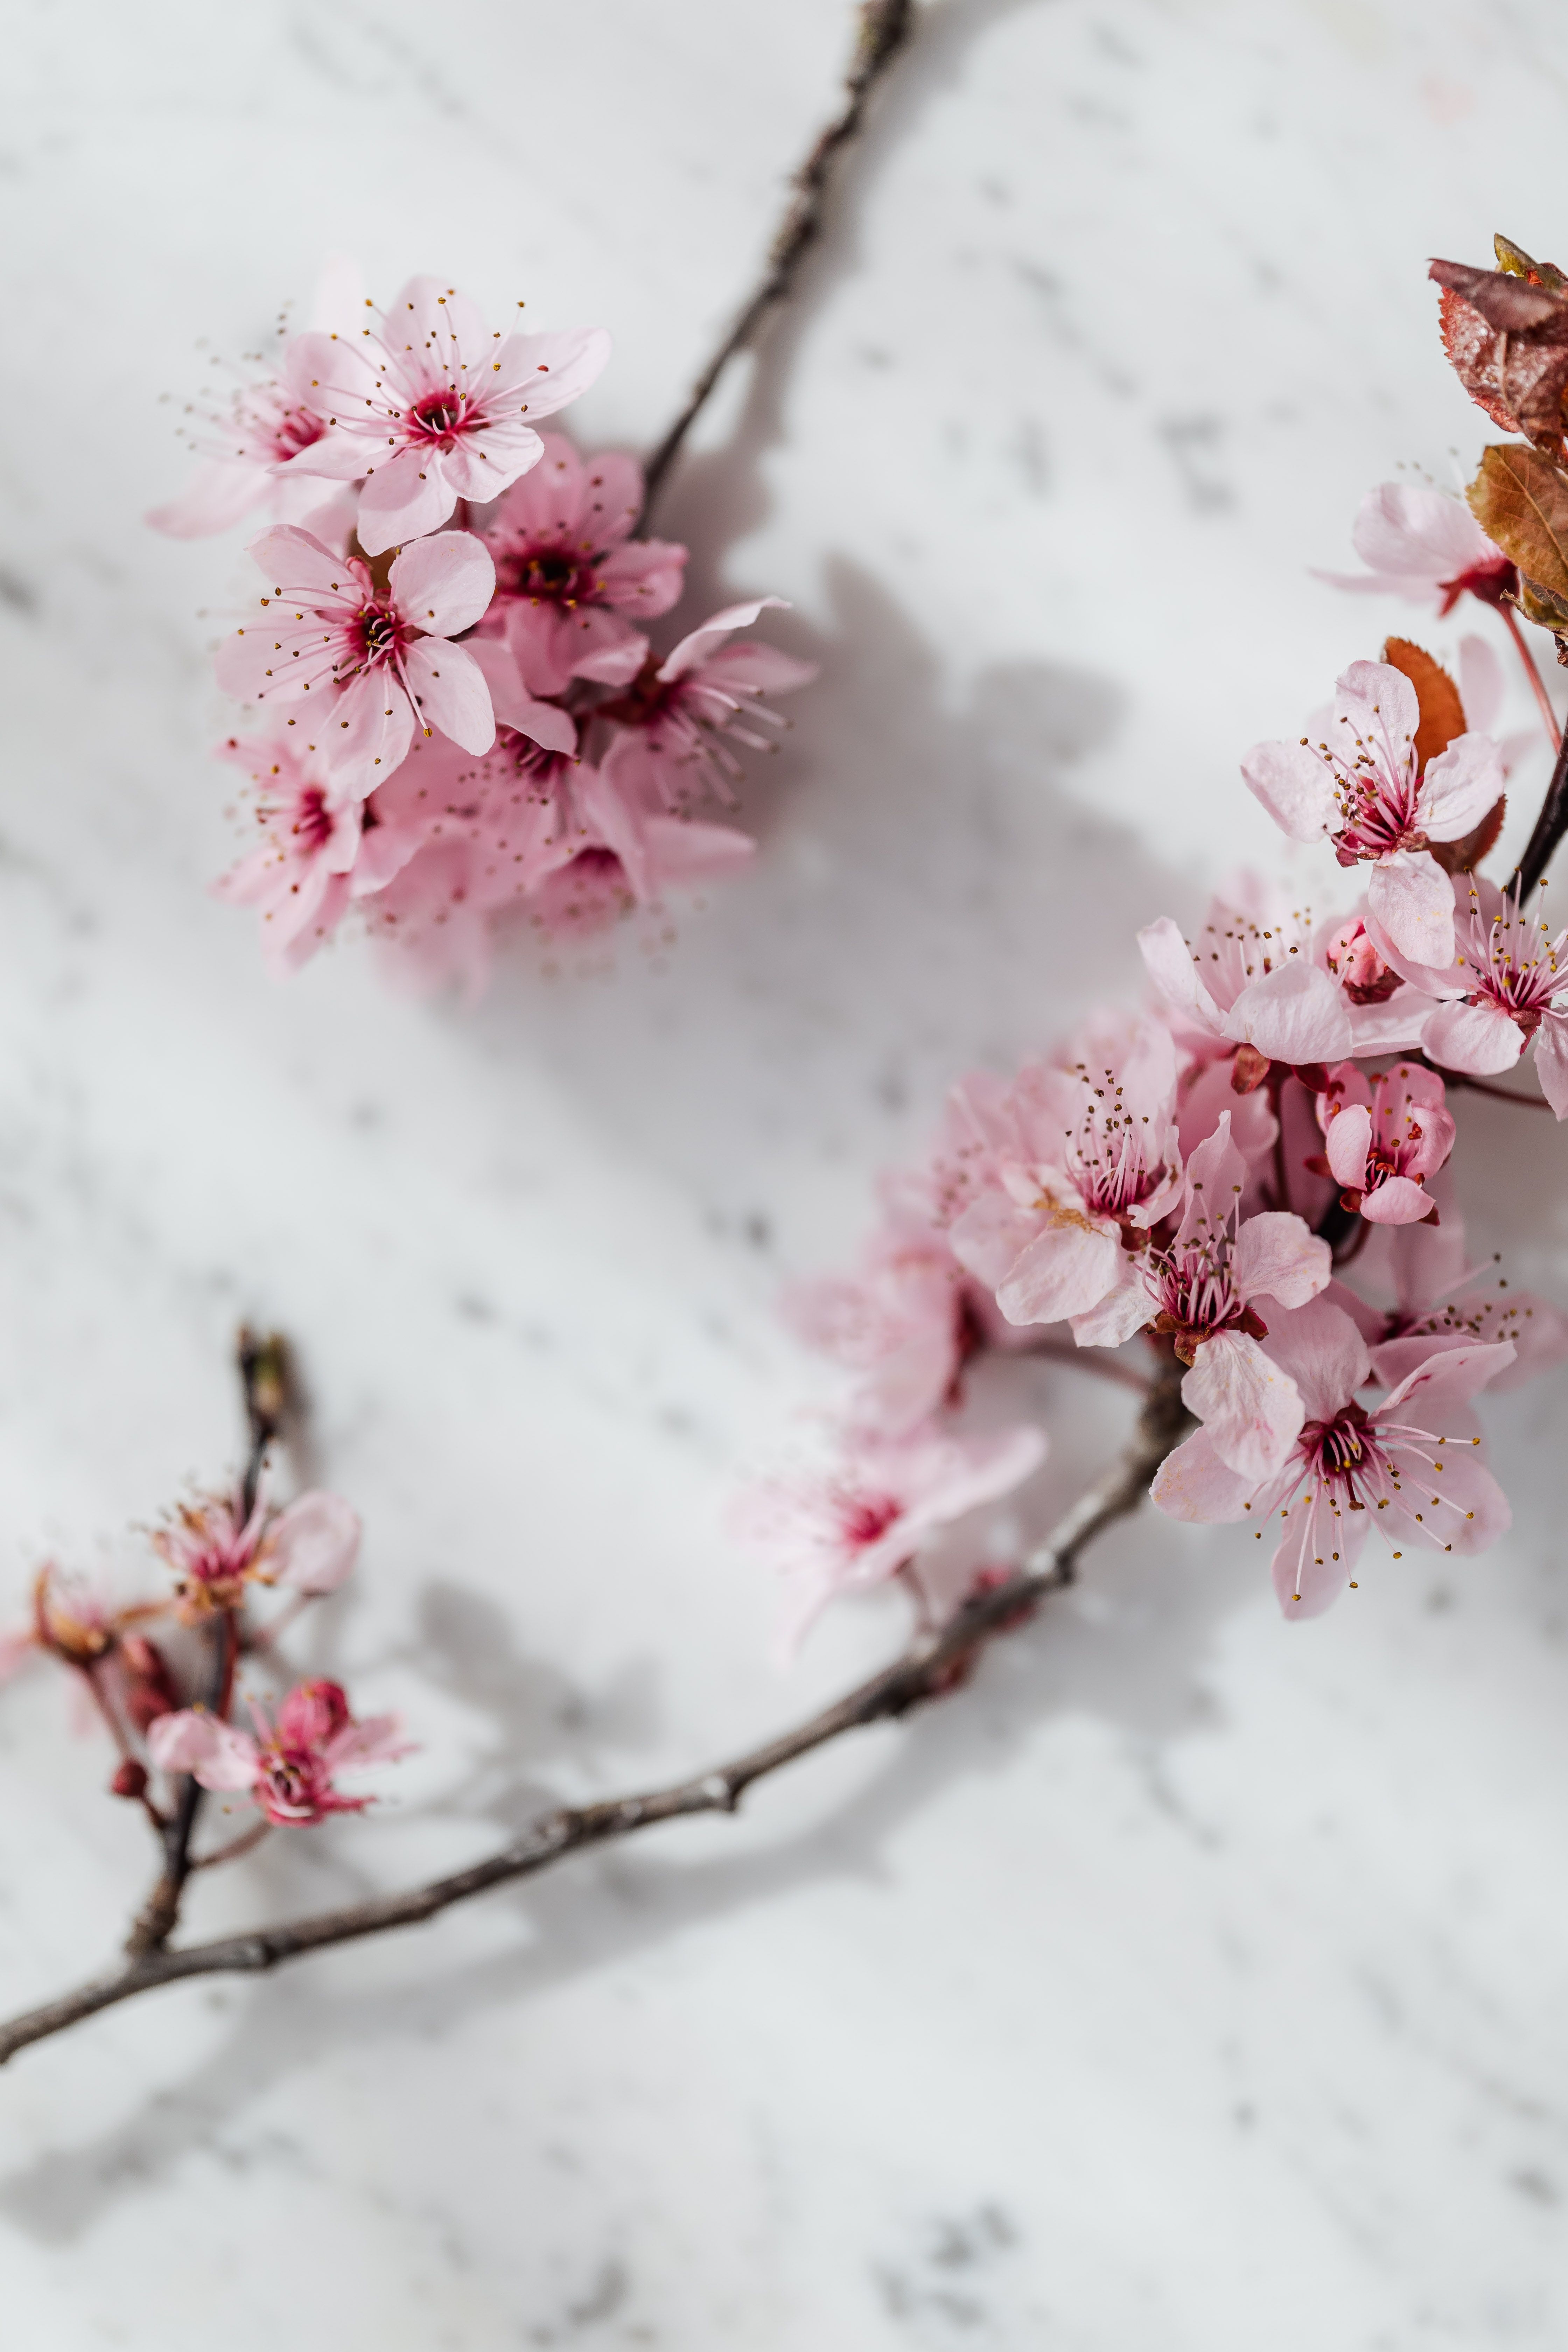 Pink flowers on a marble background - Photography, flower, beautiful, warm, simple, peace, clean, Android, cherry, April, rose gold, profile picture, pretty, happy, plants, spring